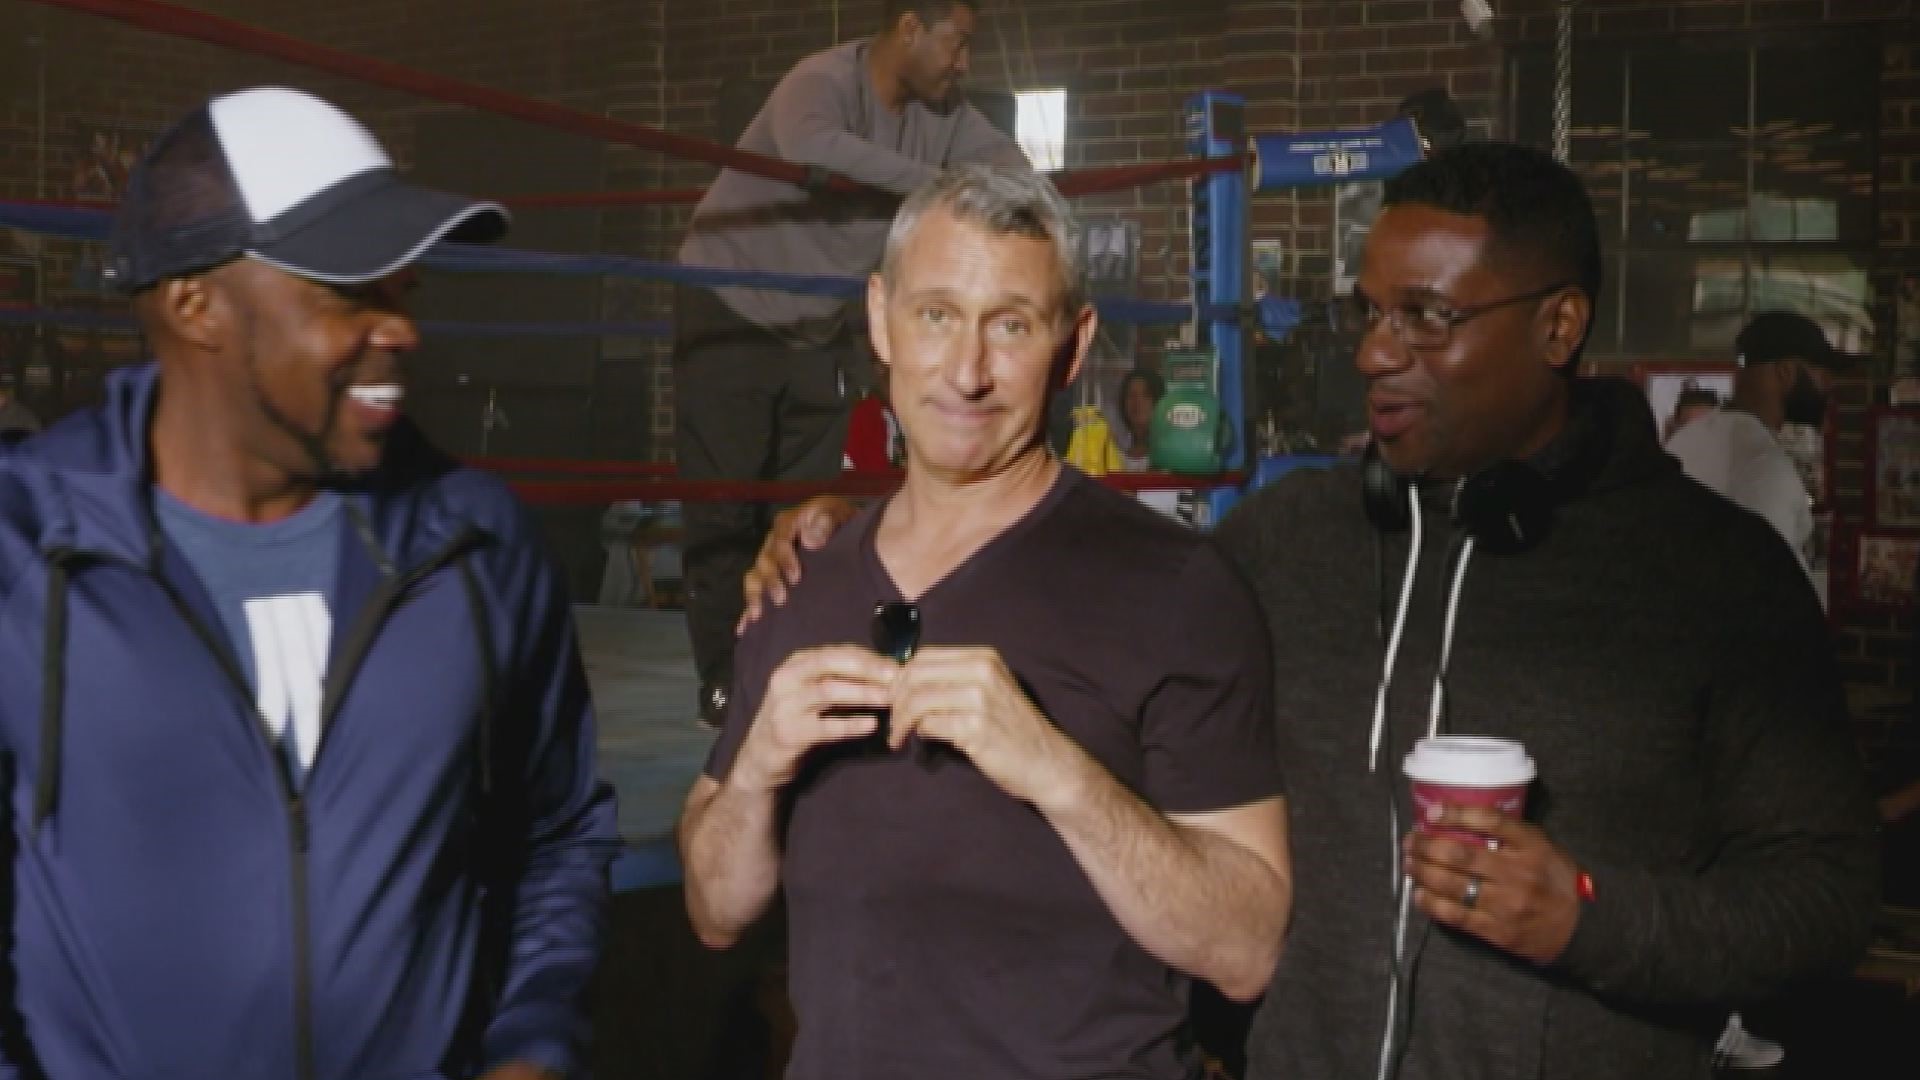 "What Men Want" producer Adam Shankman and director Will Packer joined The A-Scene's Francesca Amiker at the State Farm Arena for a behind the scenes look at how their current box office comedy was made in Atlanta.